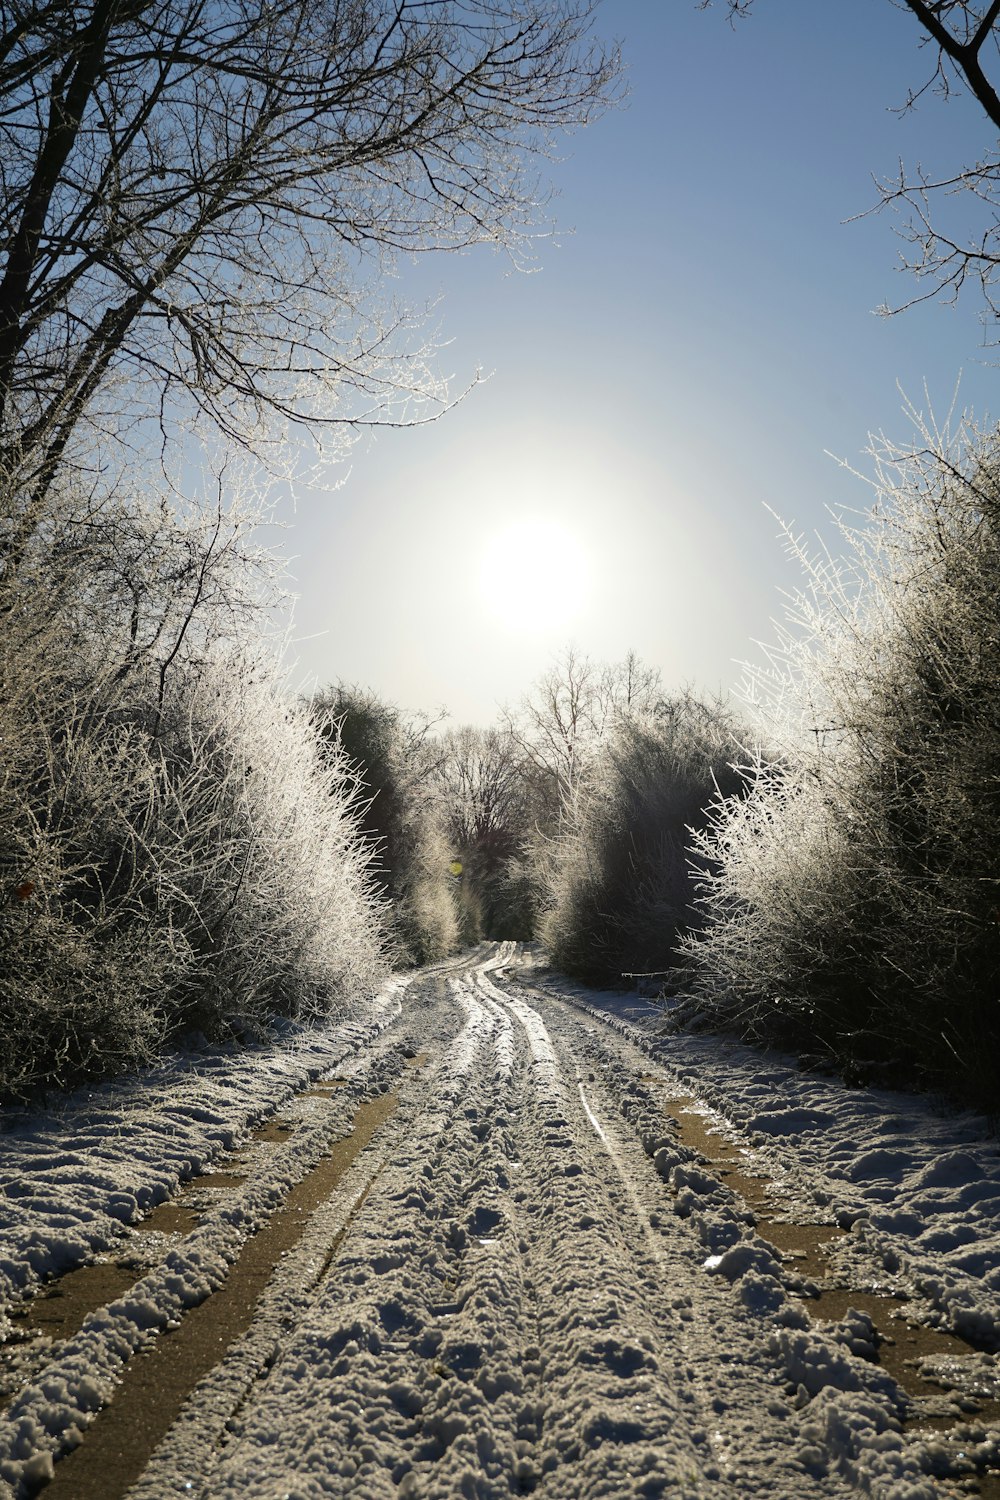 the sun is shining over a snowy road